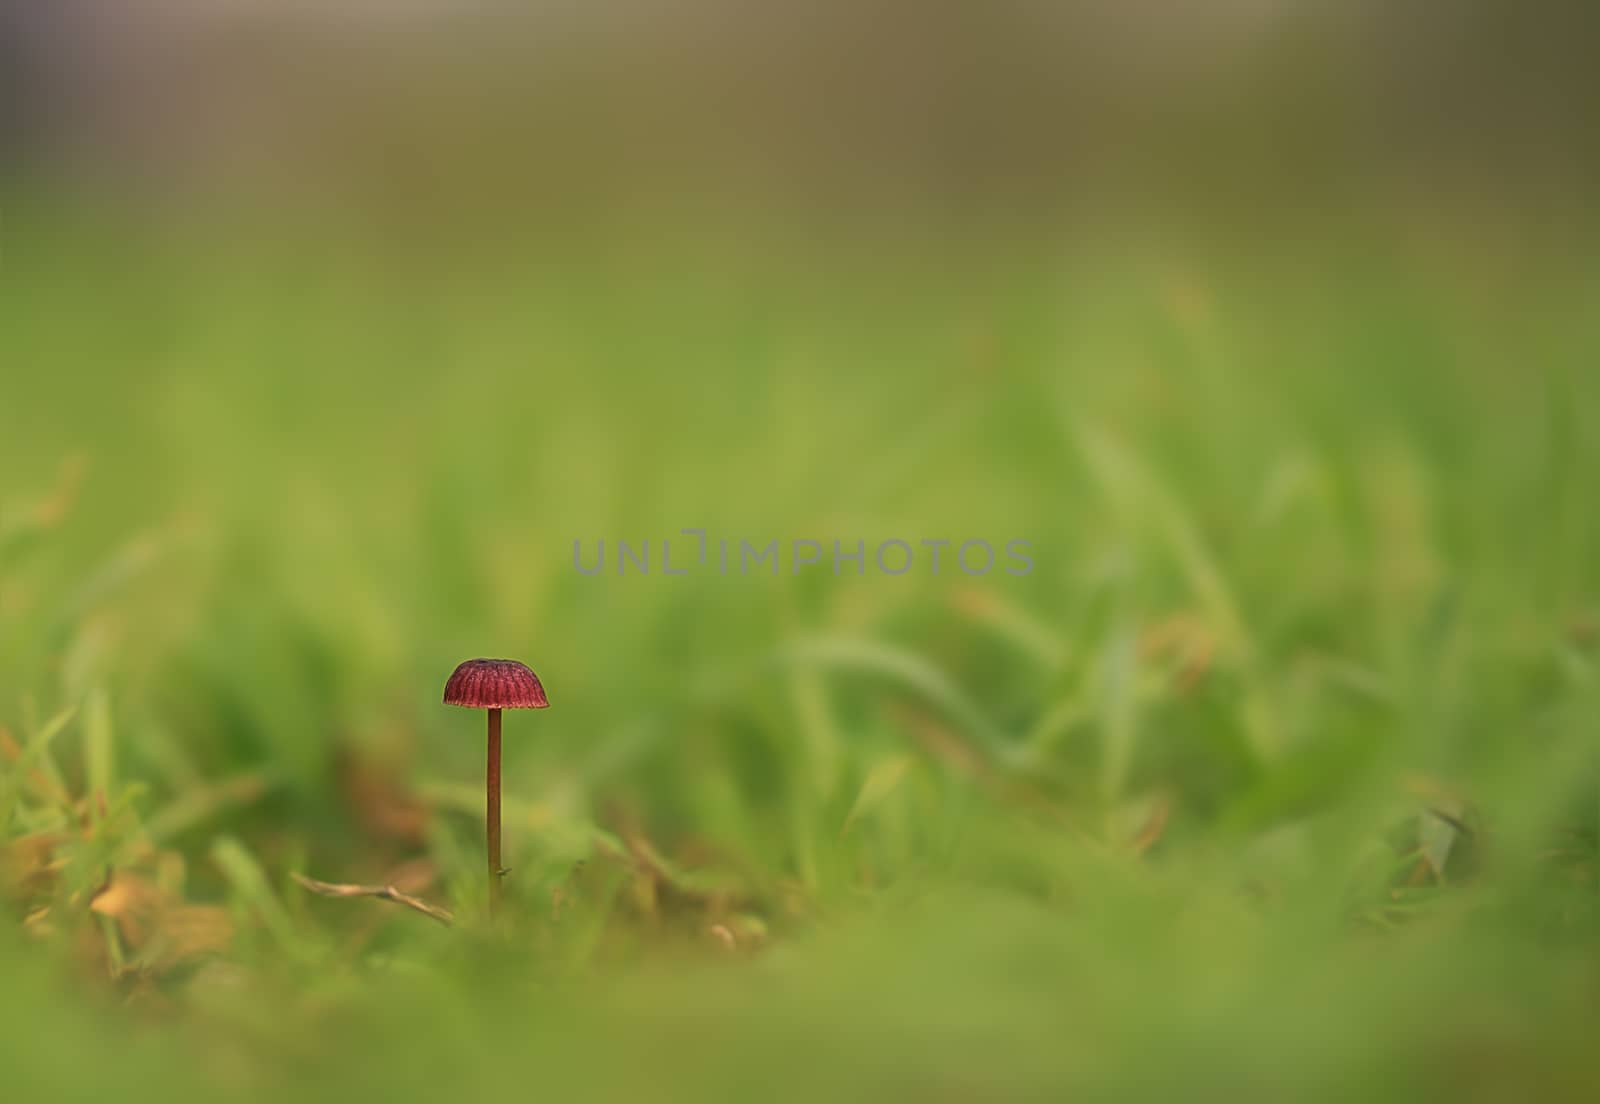 A single solitary mushroom in the field, an example of minimalism in photography